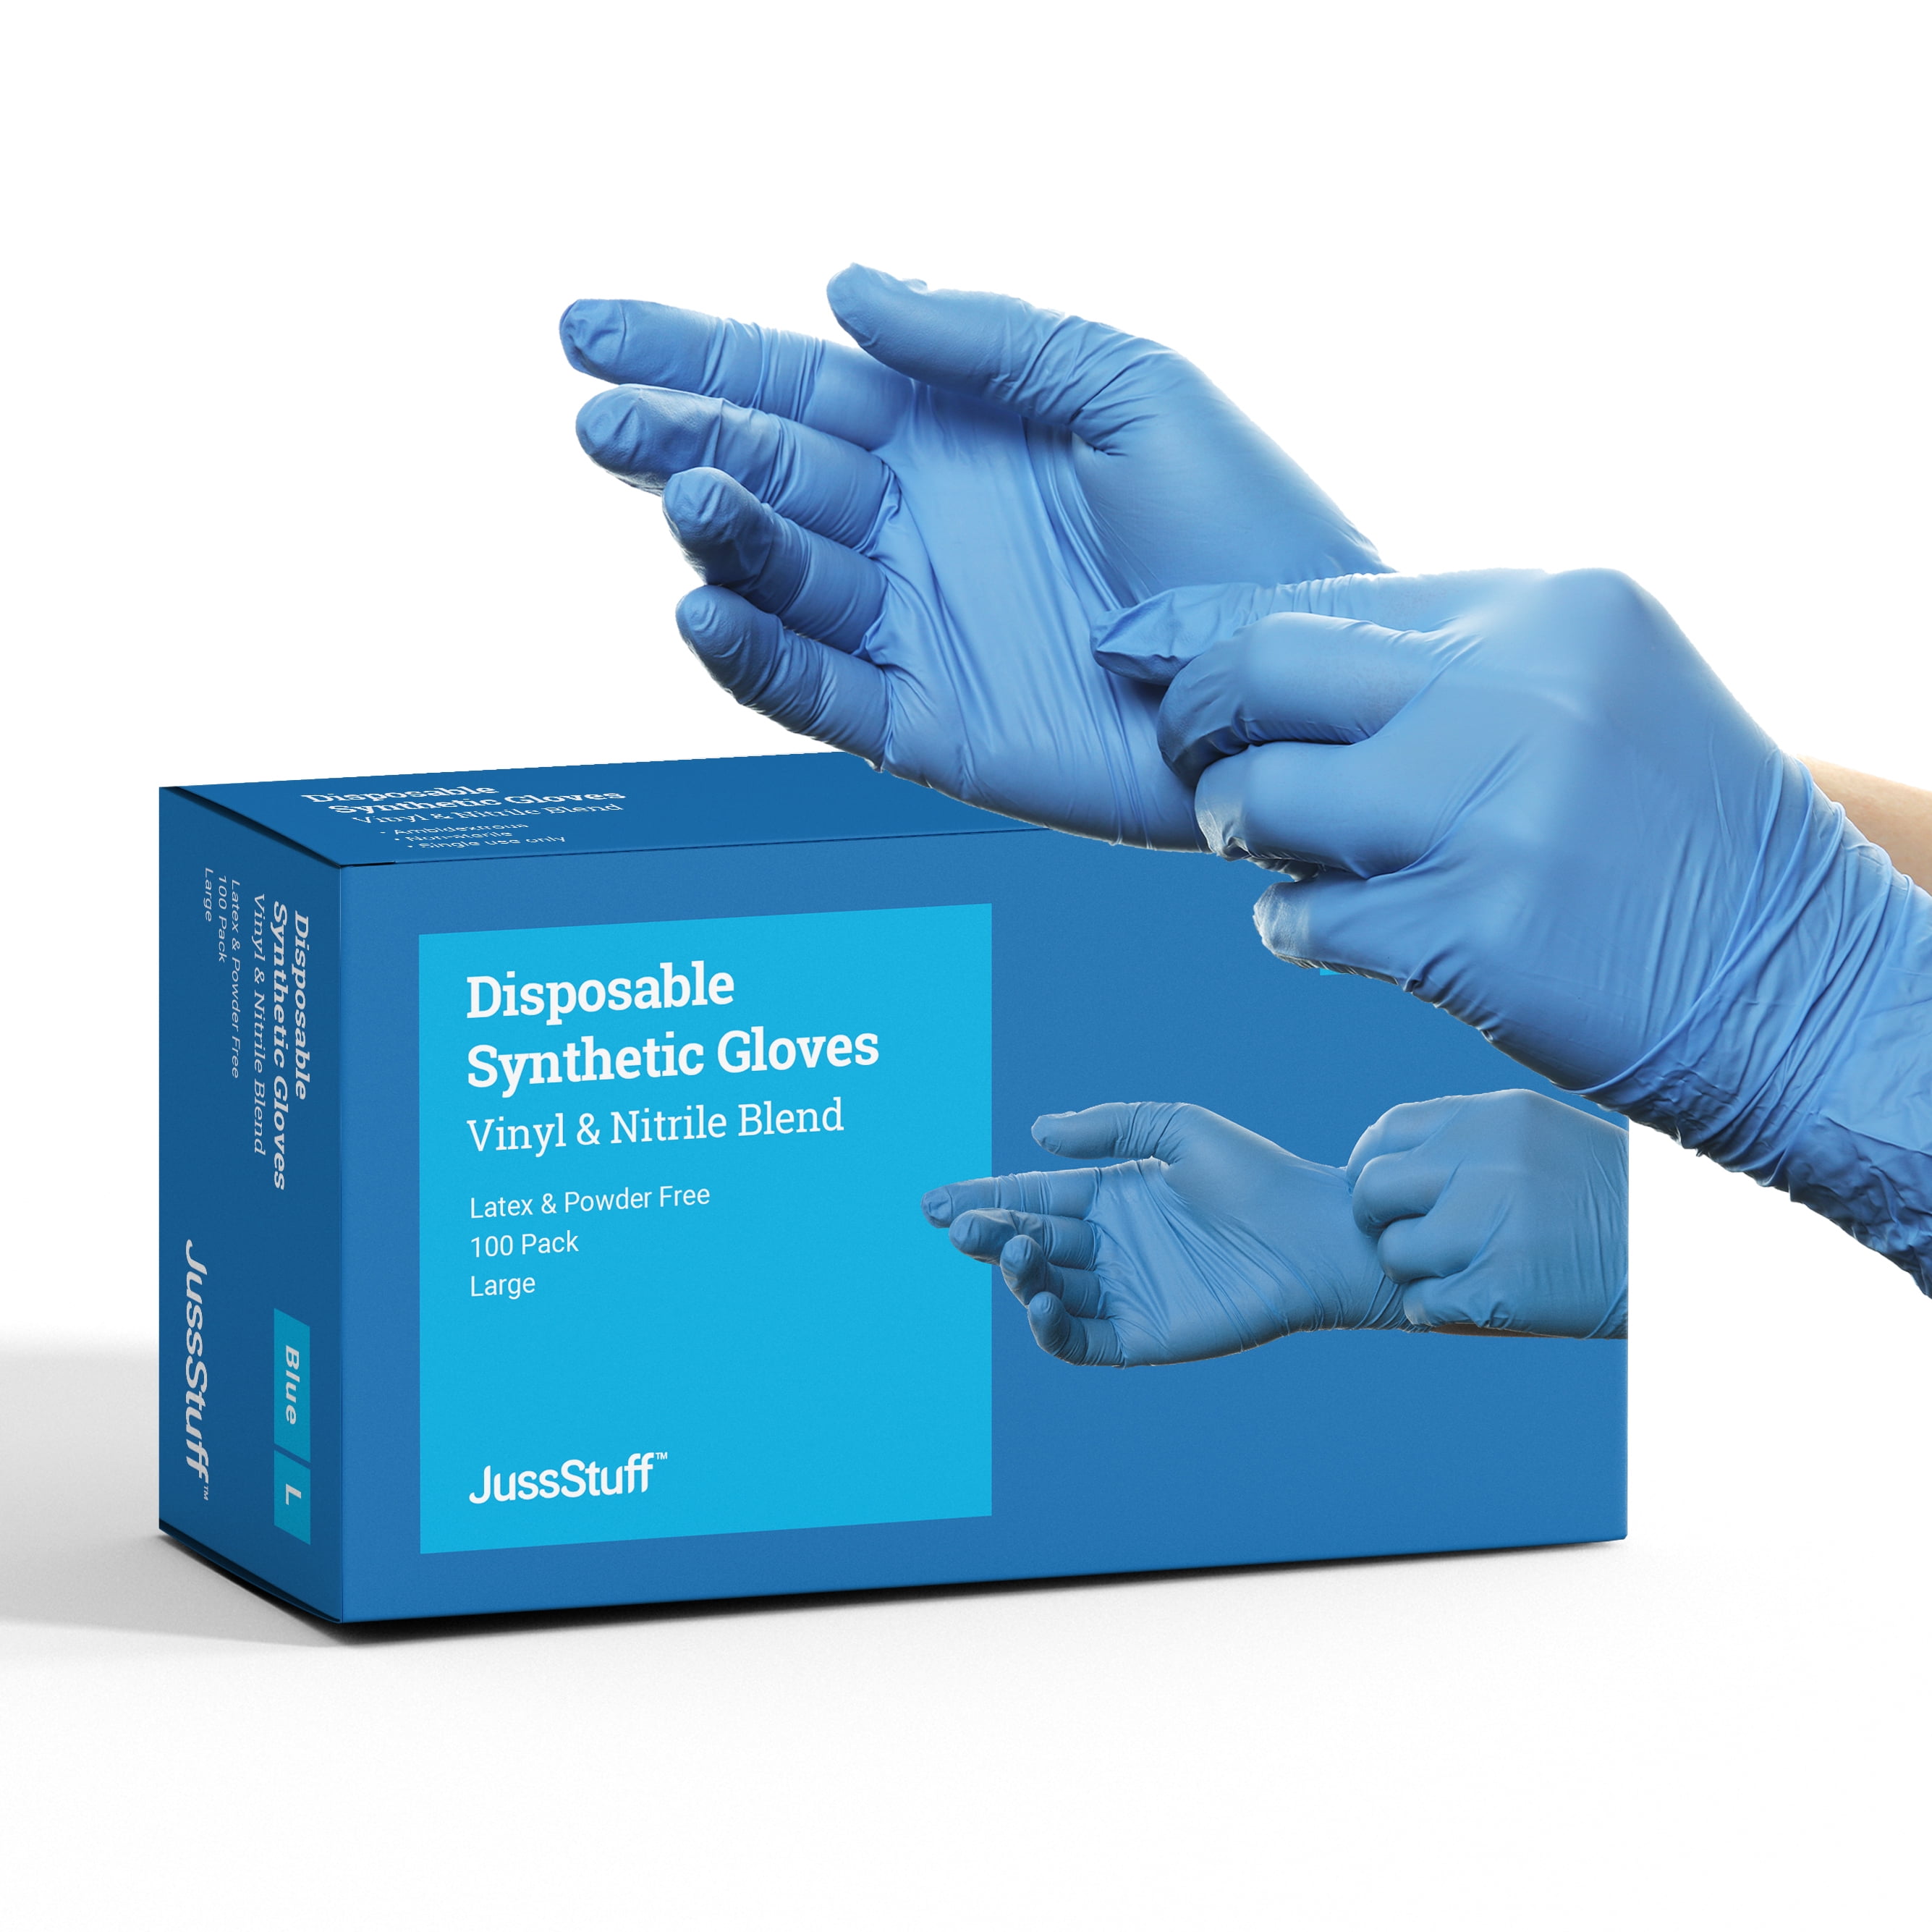 L M Strong Disposable Gloves Blue Multipurpose Powder Latex Free S 